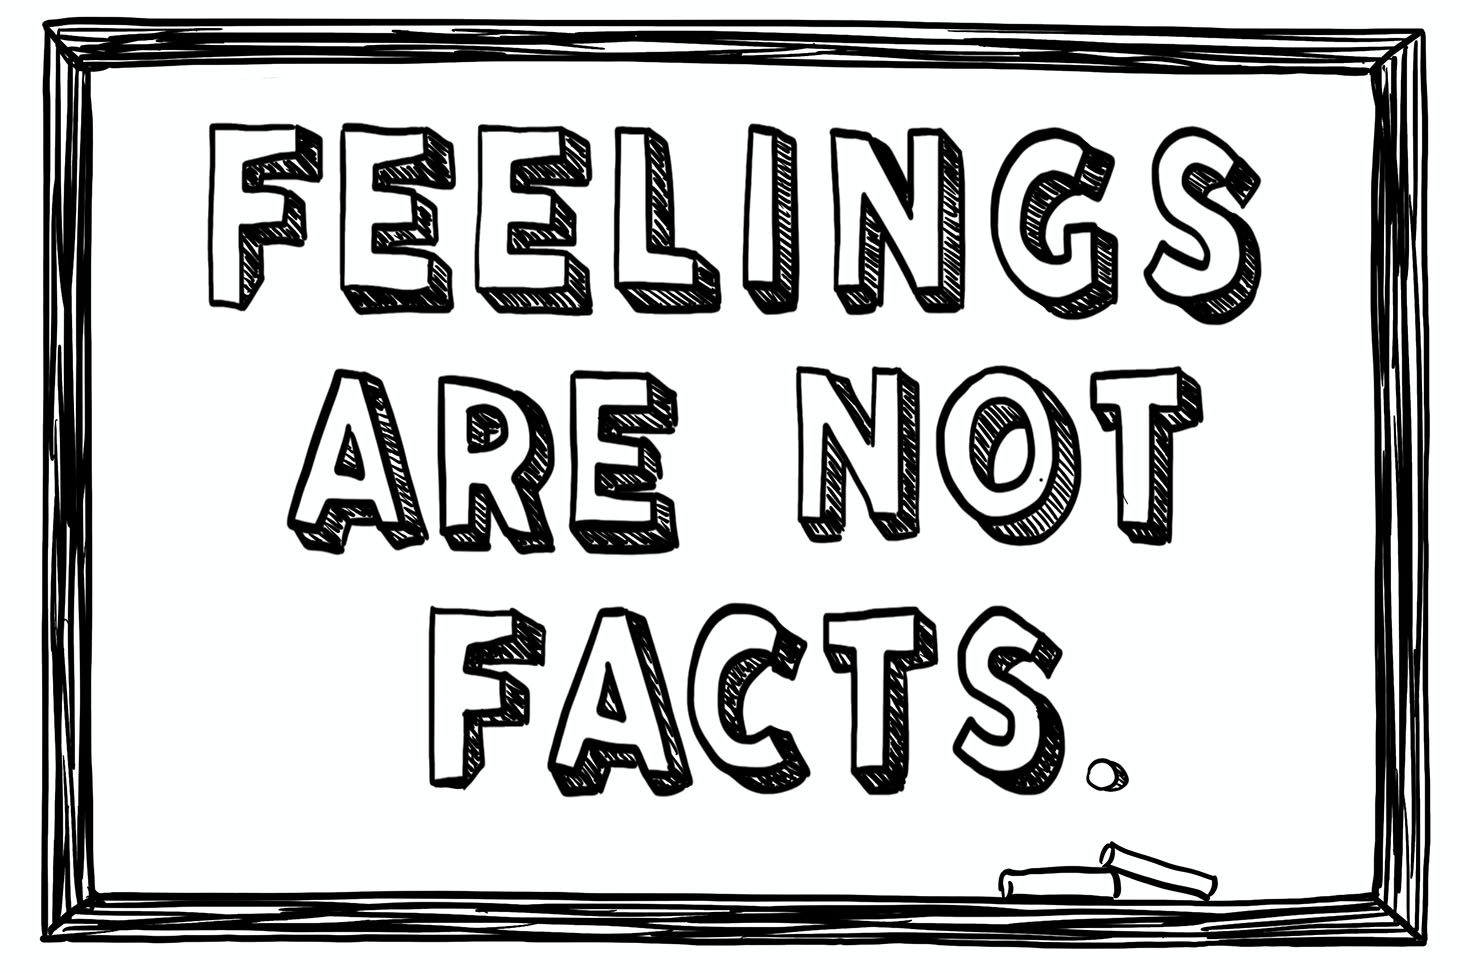 A chalkboard banner proclaiming Feelings Are Not Facts.